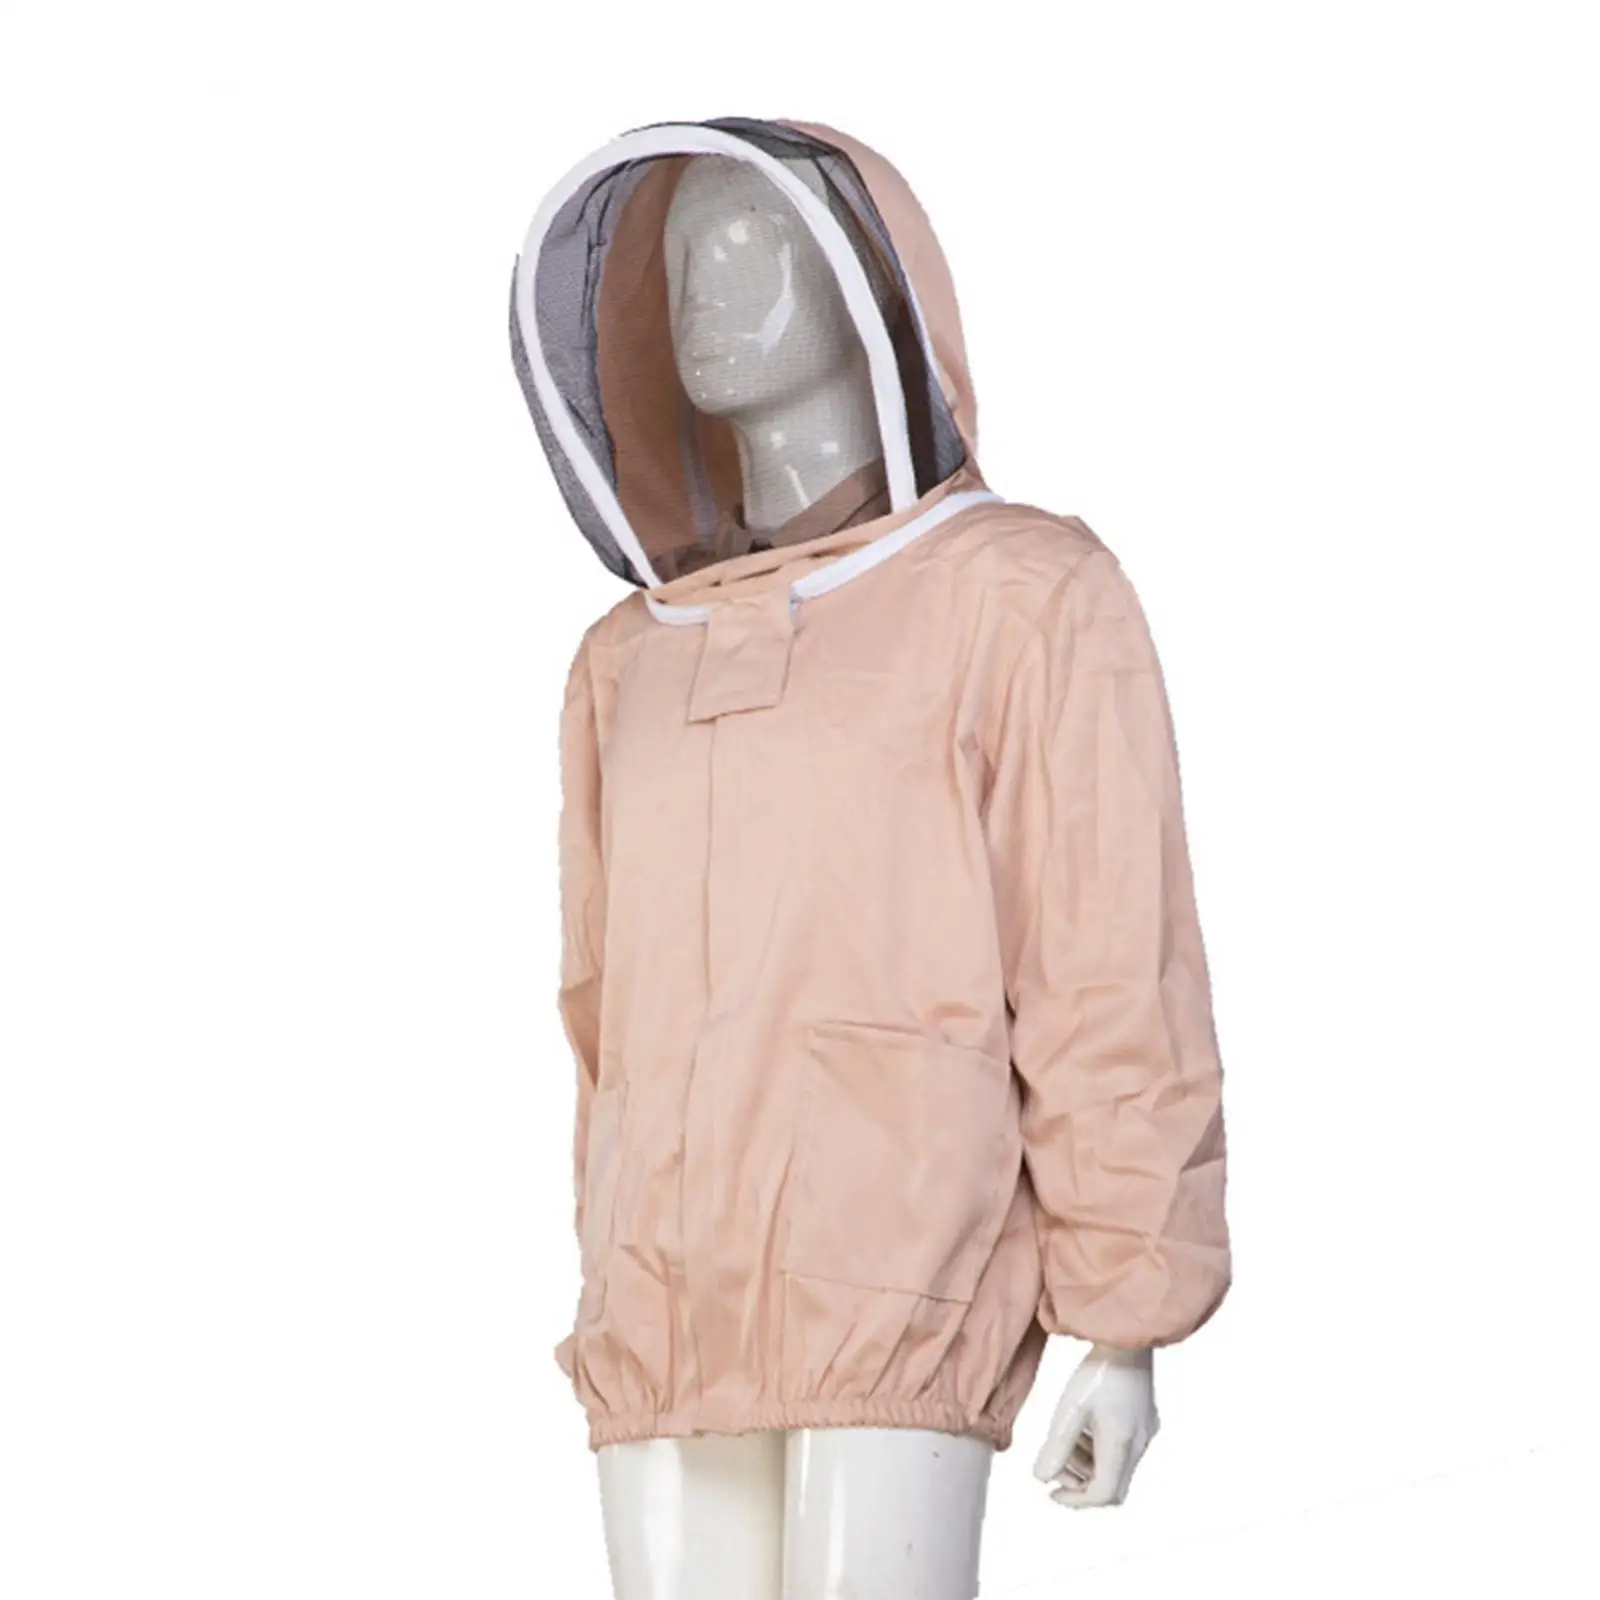 Beekeeper Jacket with Fencing Veil with Pockets Professional with Hat Equip